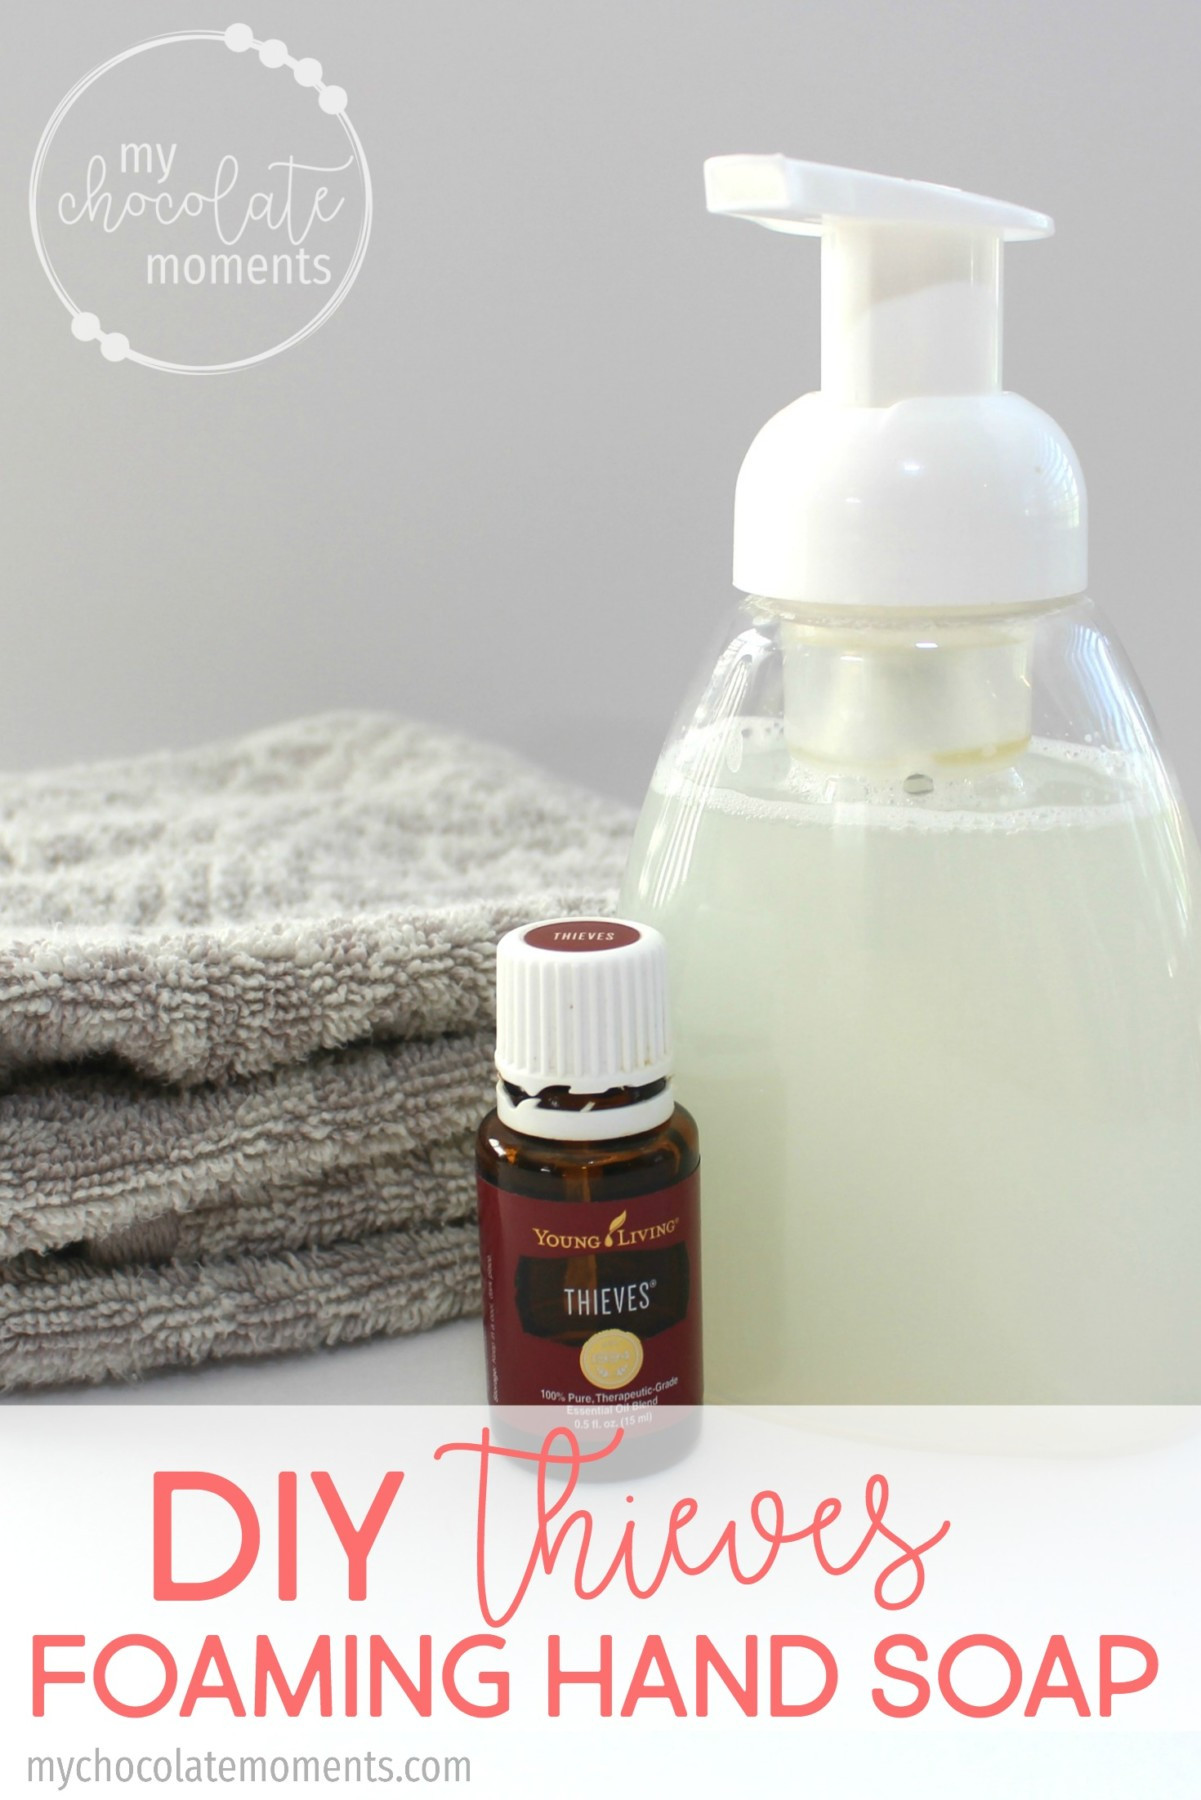 Best ideas about DIY Hand Soap . Save or Pin DIY foaming hand soap Now.